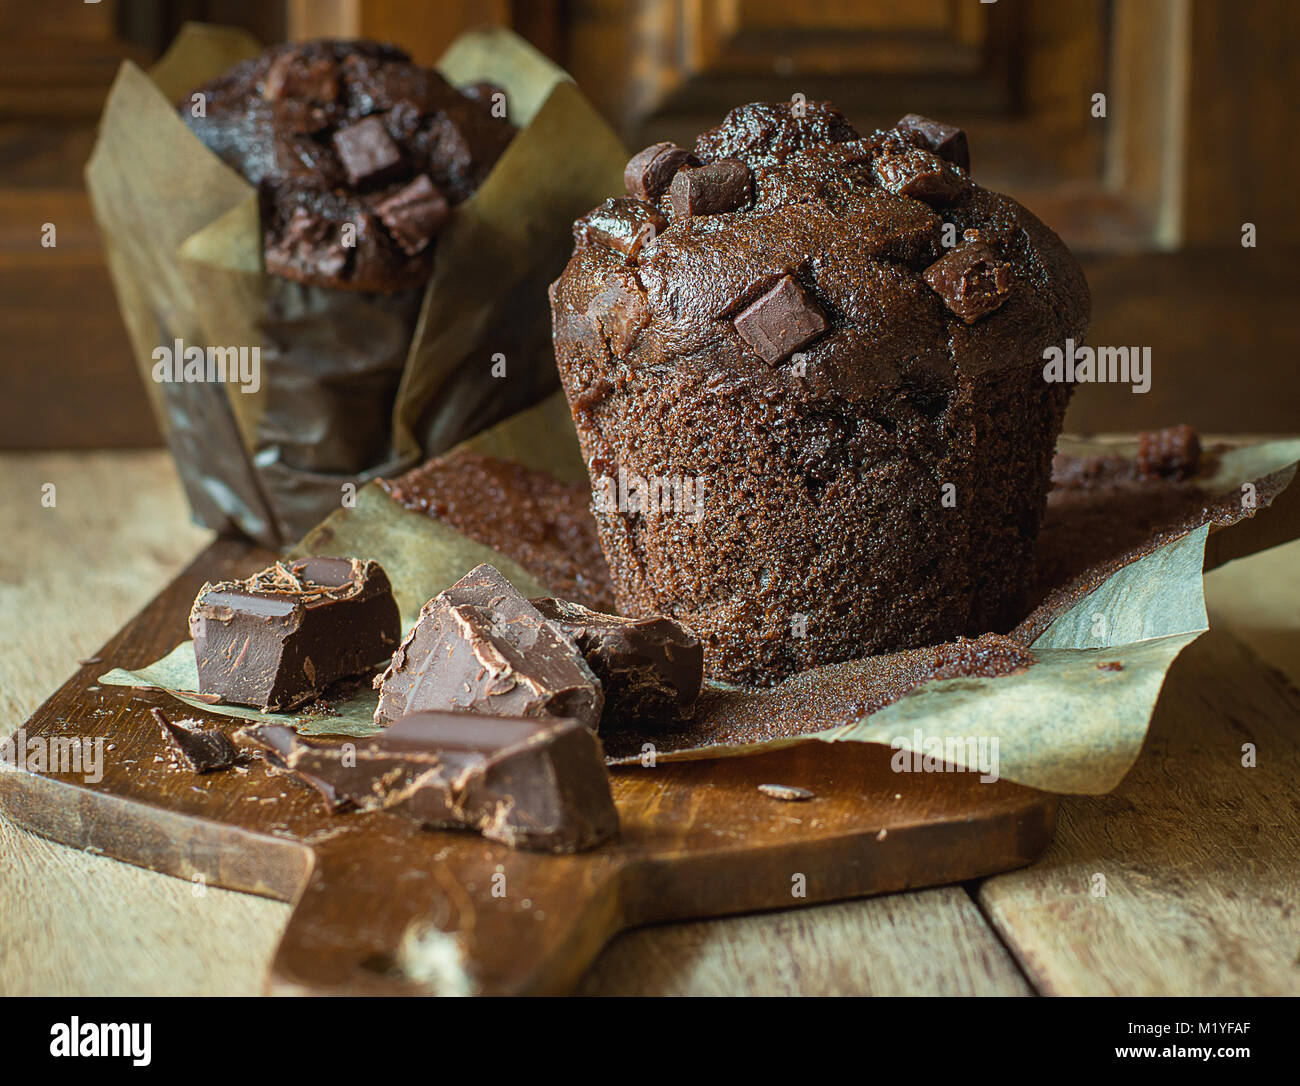 Scrumptious Home Baked Chocolate Chips Muffins in Brown Paper on Wooden Cutting Board. Rustic Kitchen Interior Rural Style. Square Size Stock Photo